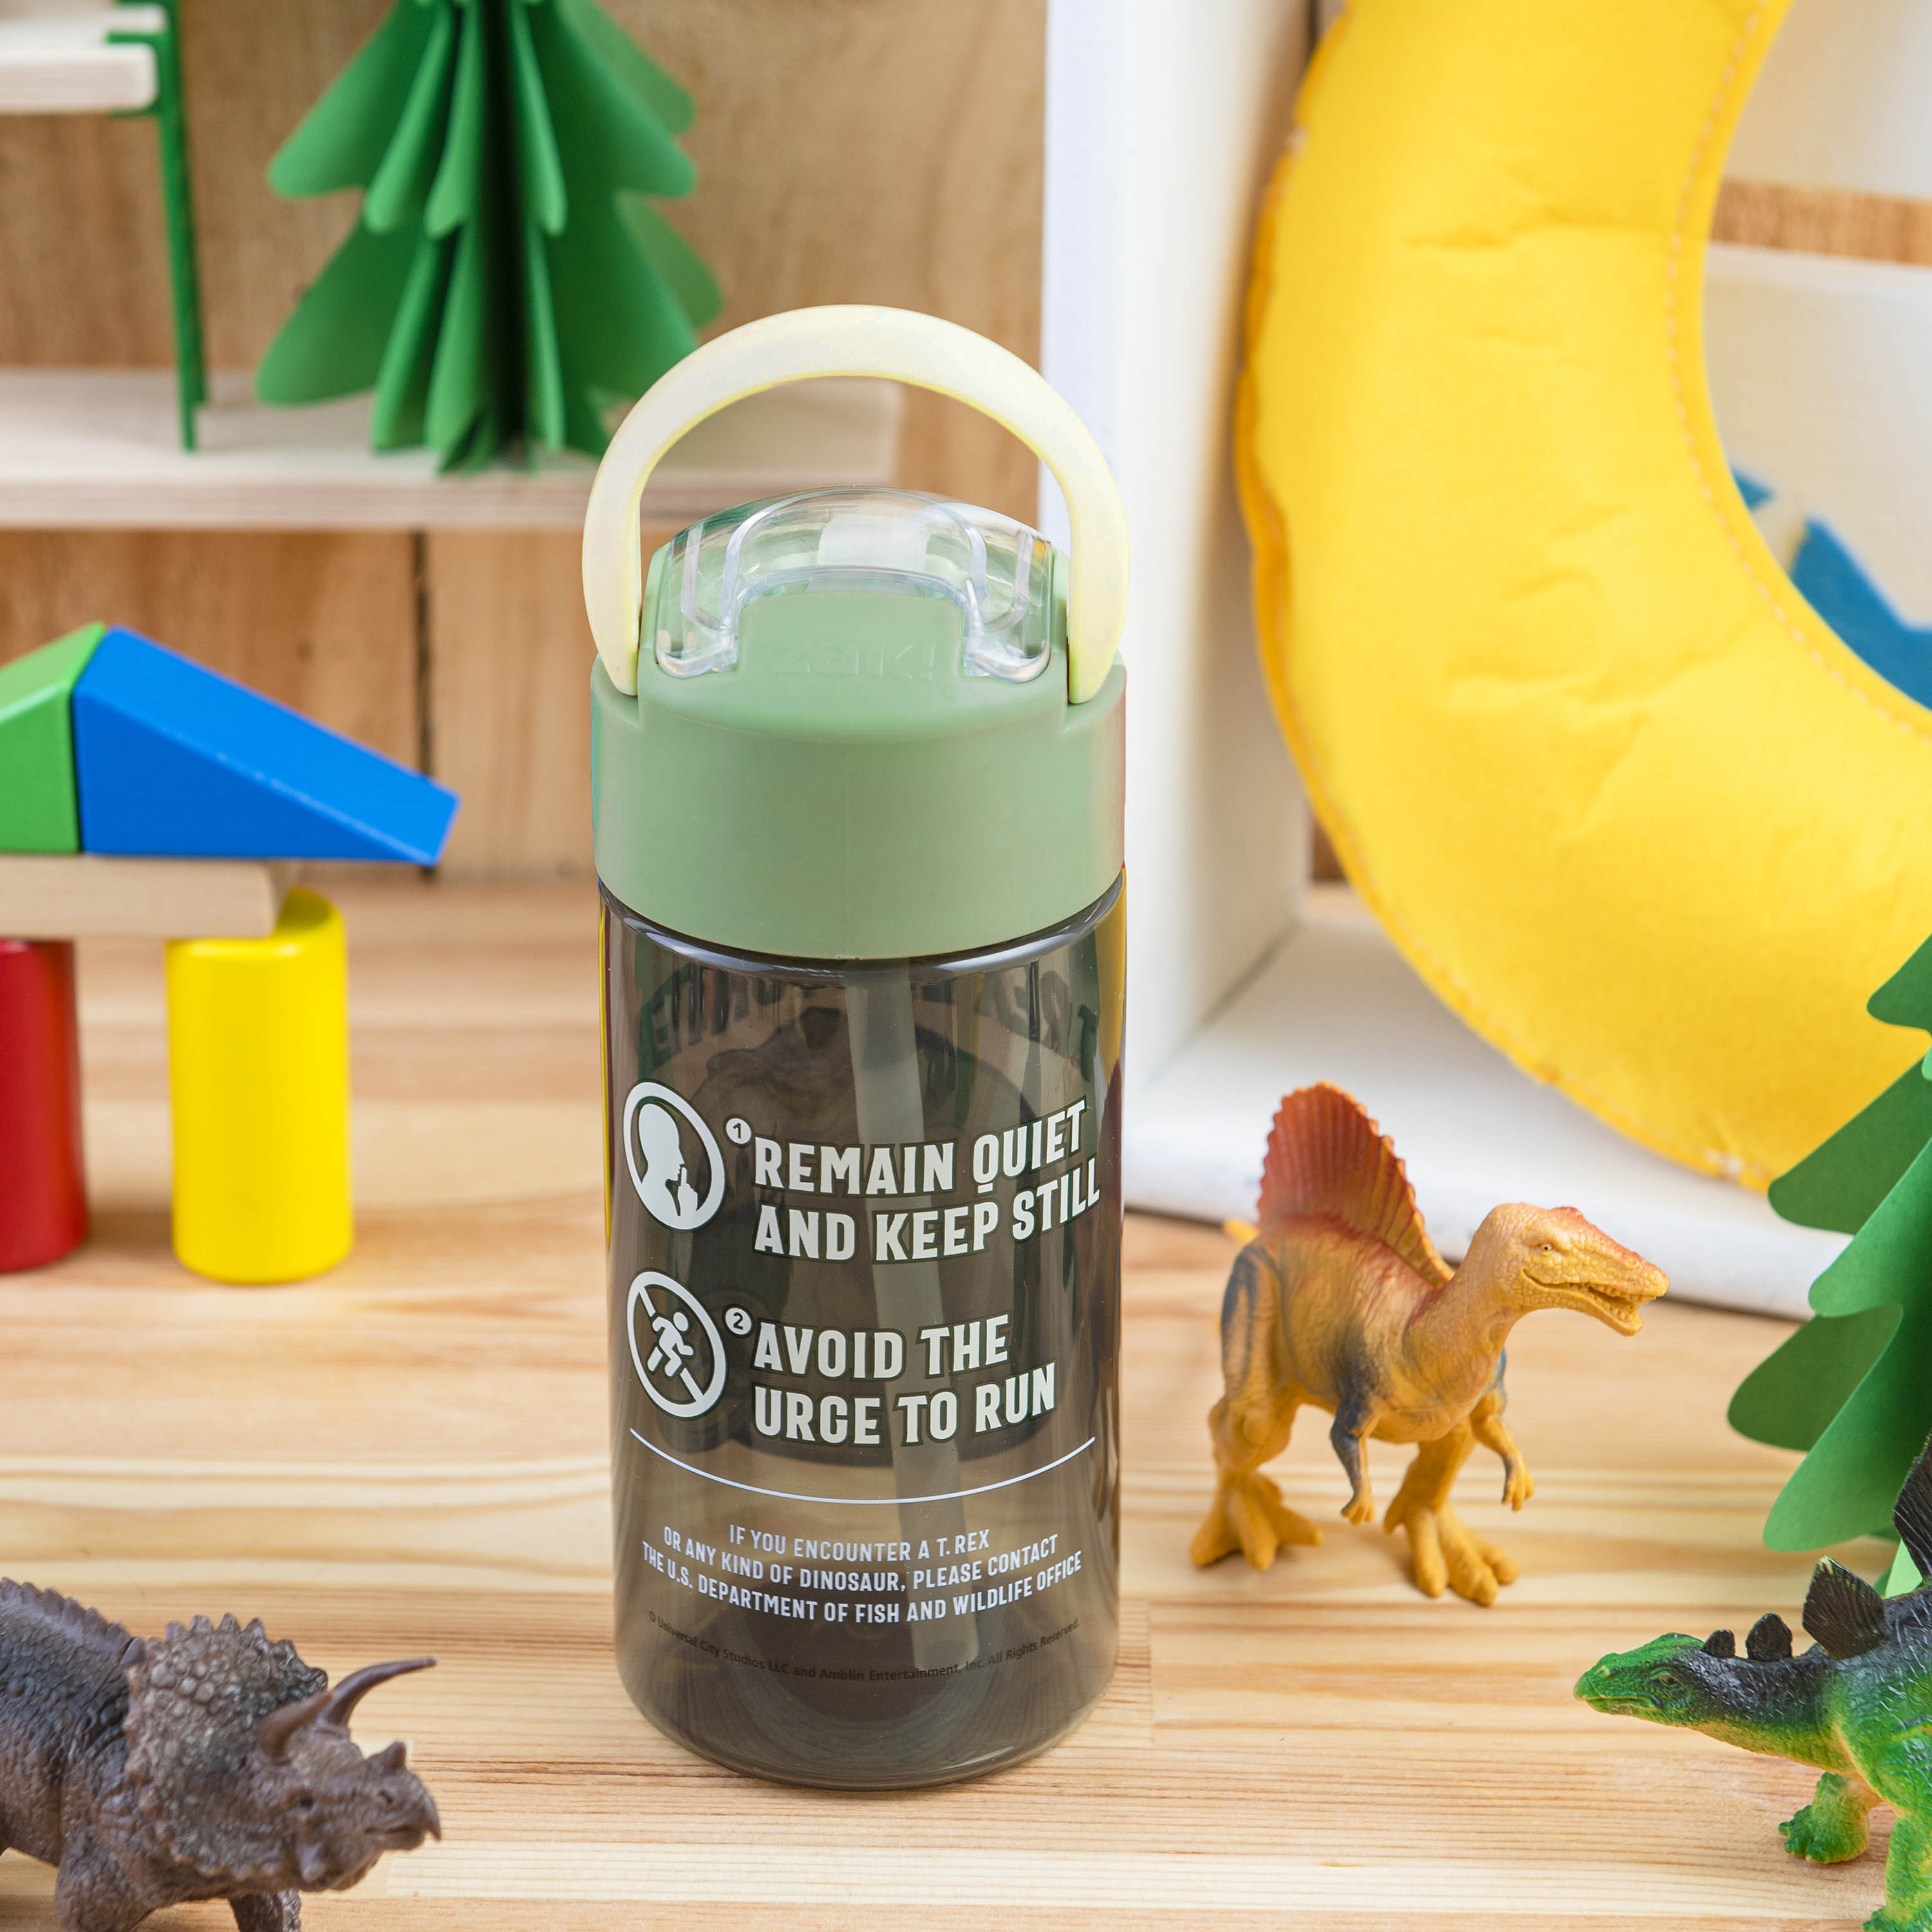 Jurassic World Dominion 18 ounce Reusable Plastic Water Bottle with Push-button lid, How to Survive a T-Rex Encounter, 2-piece set slideshow image 4